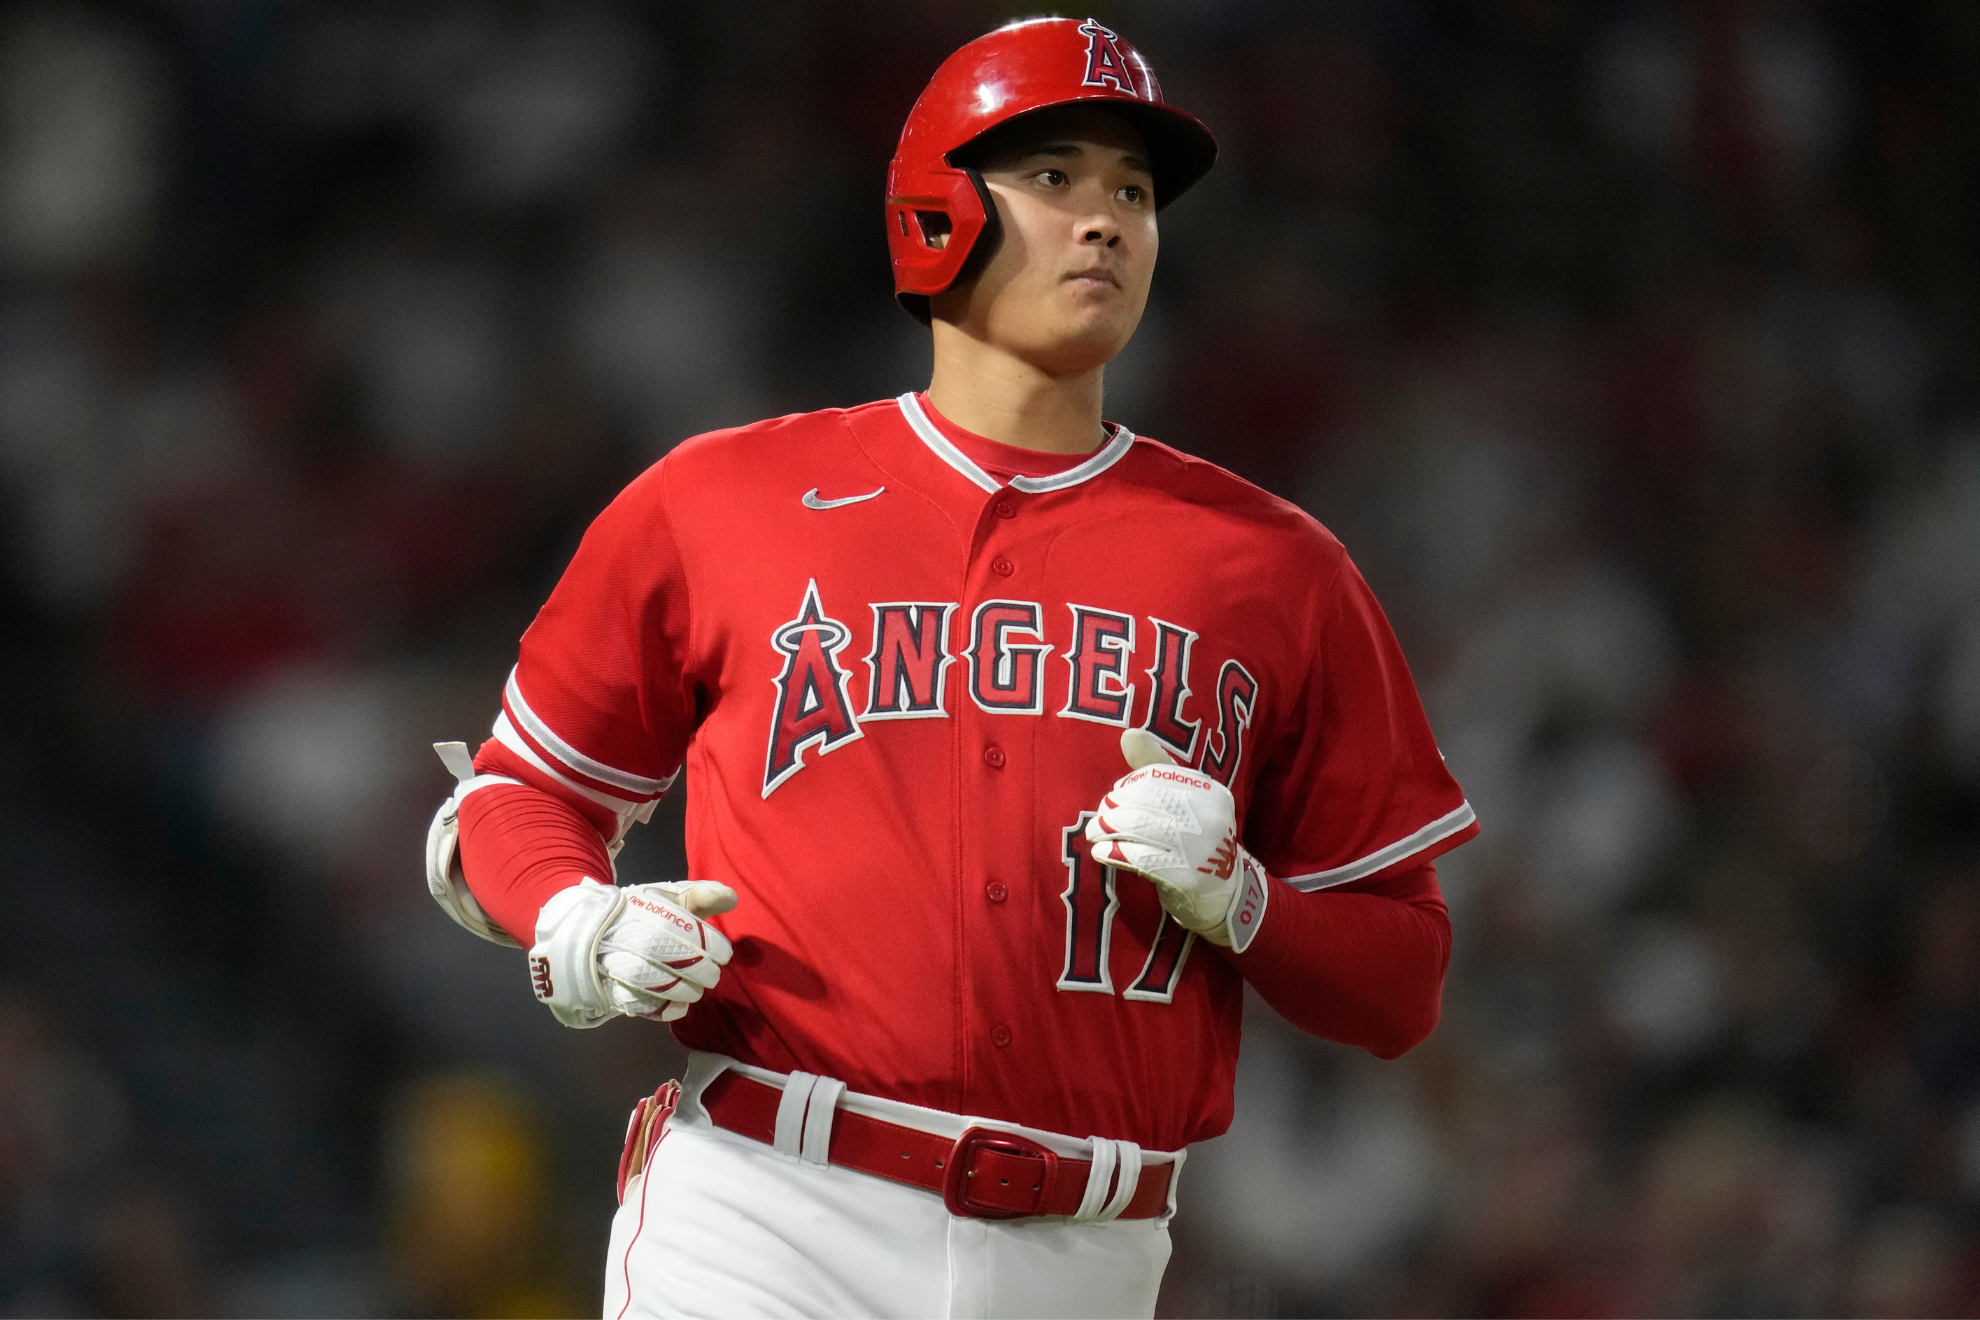 Ohtani signed with the Dodgers -- but was he close to signing with San Francisco?